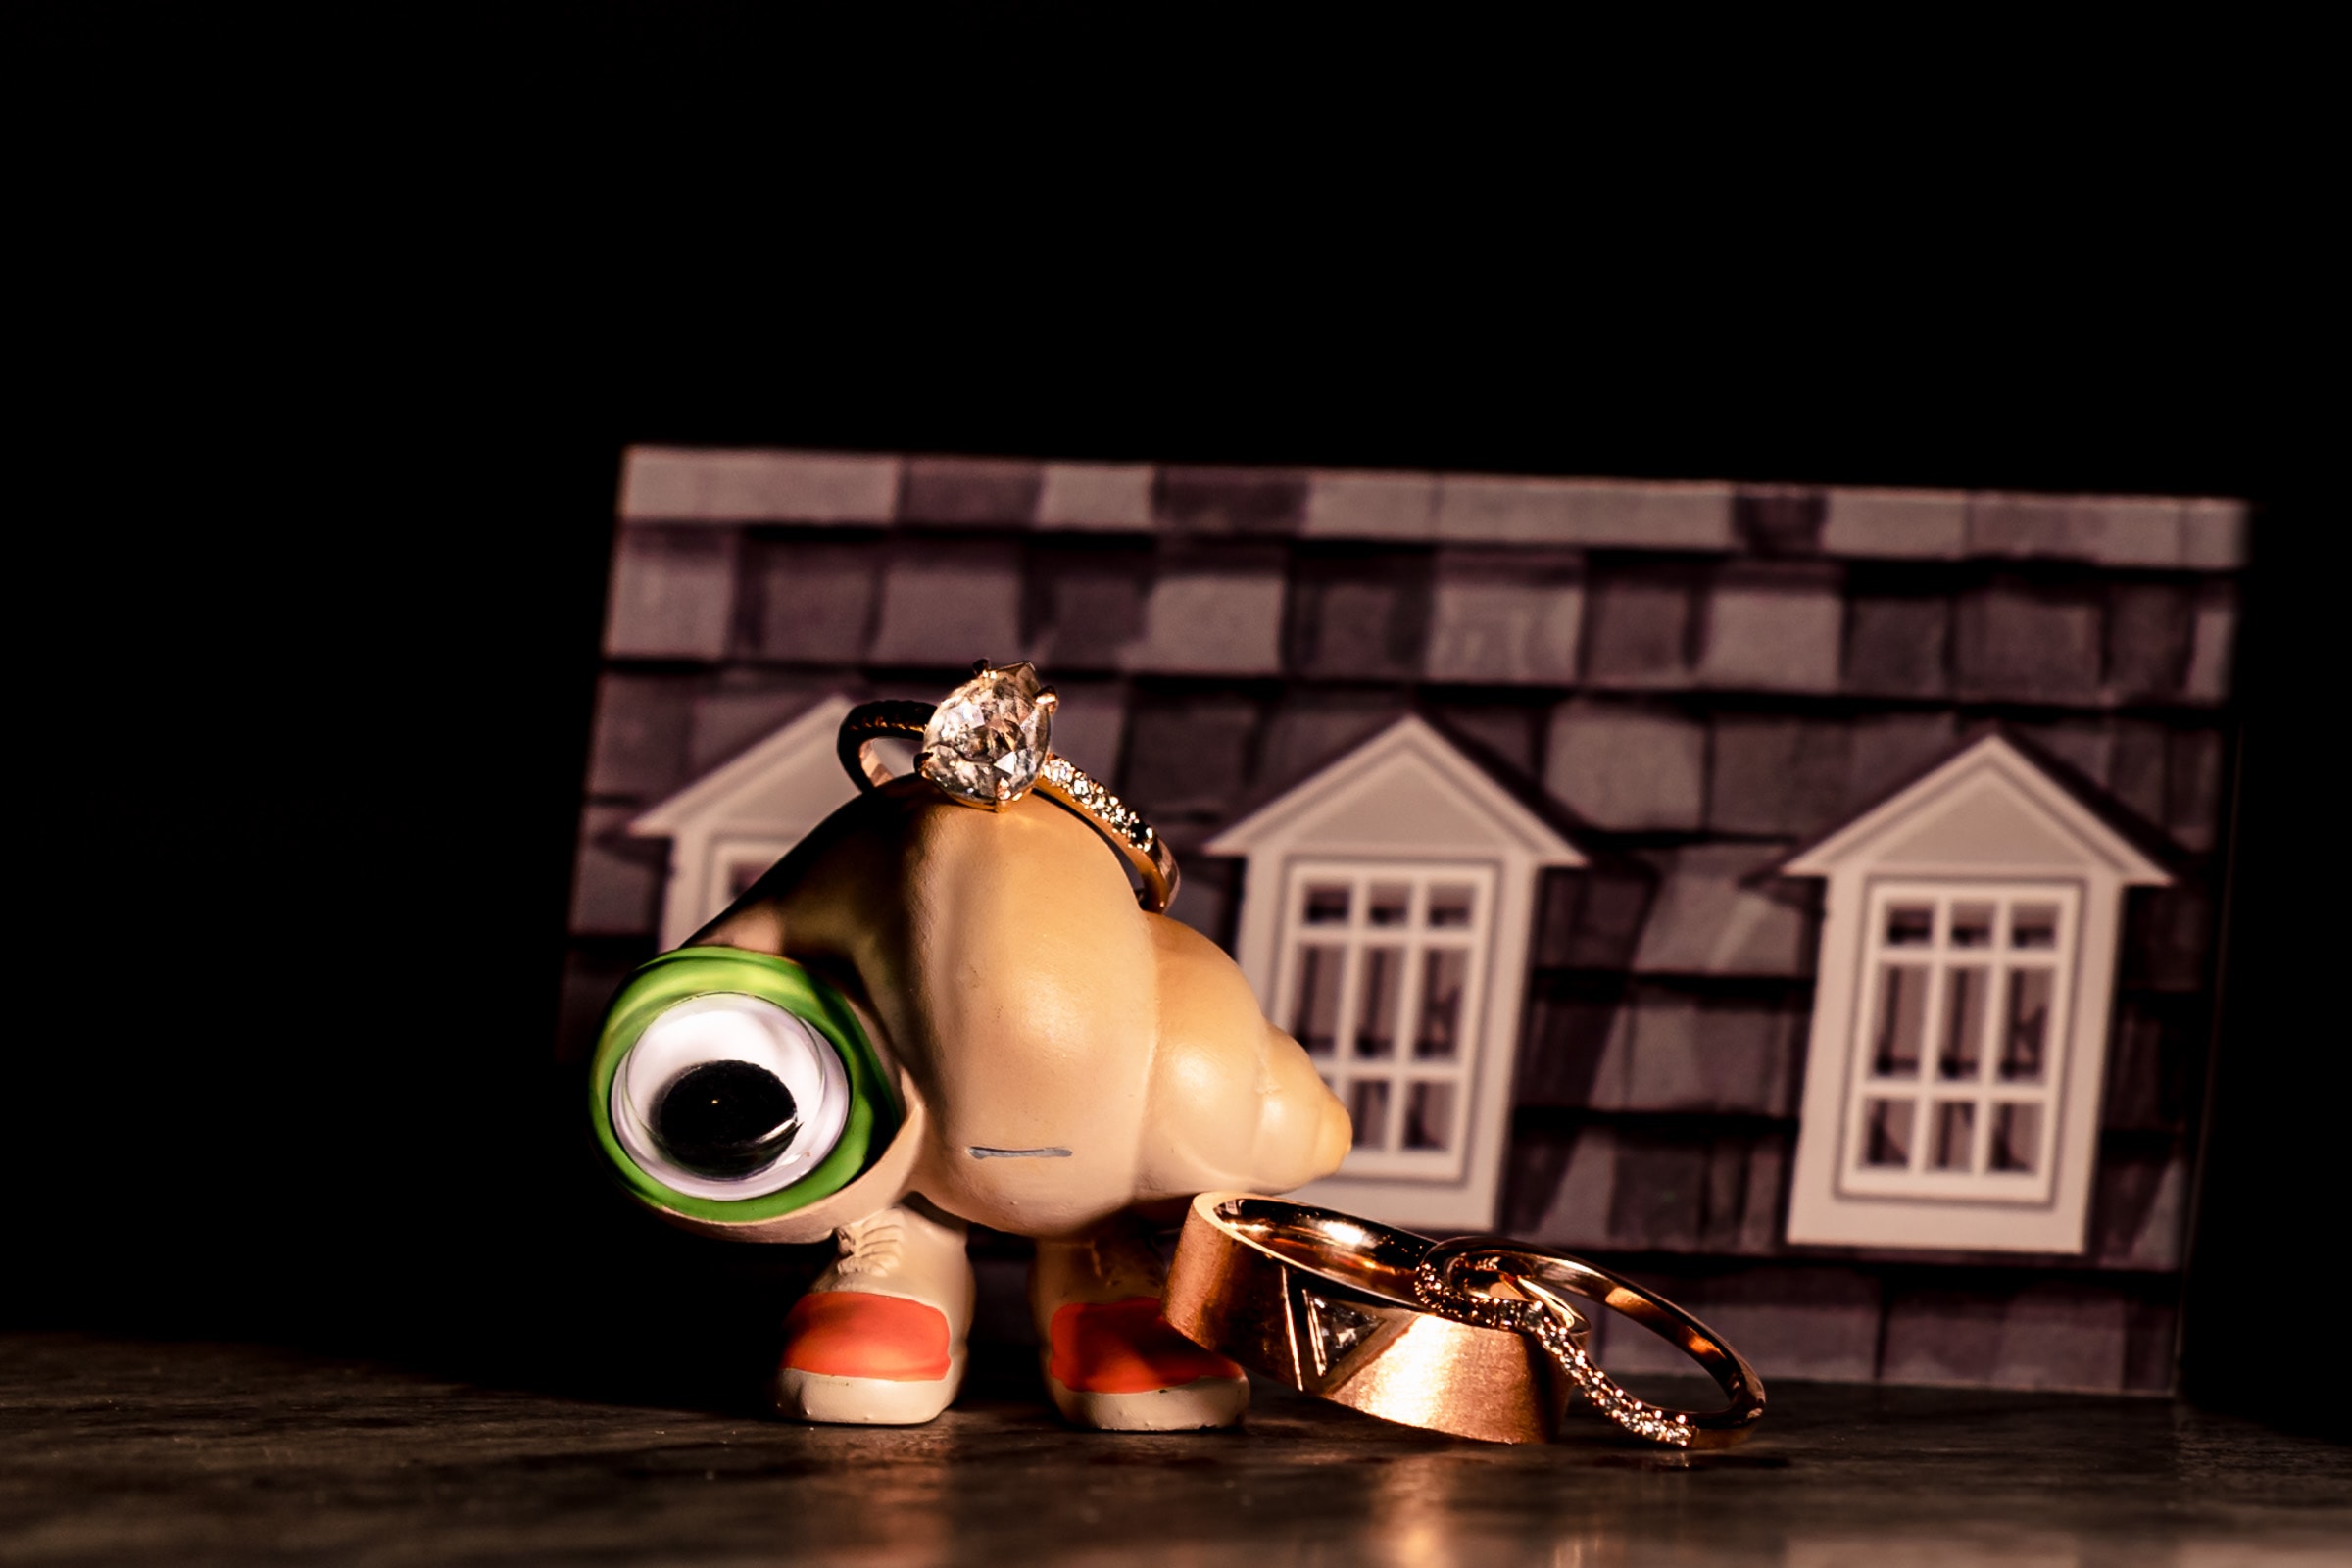 wedding rings with a figurine of Marcel the Shell with Shoes on | Kivus & Camera